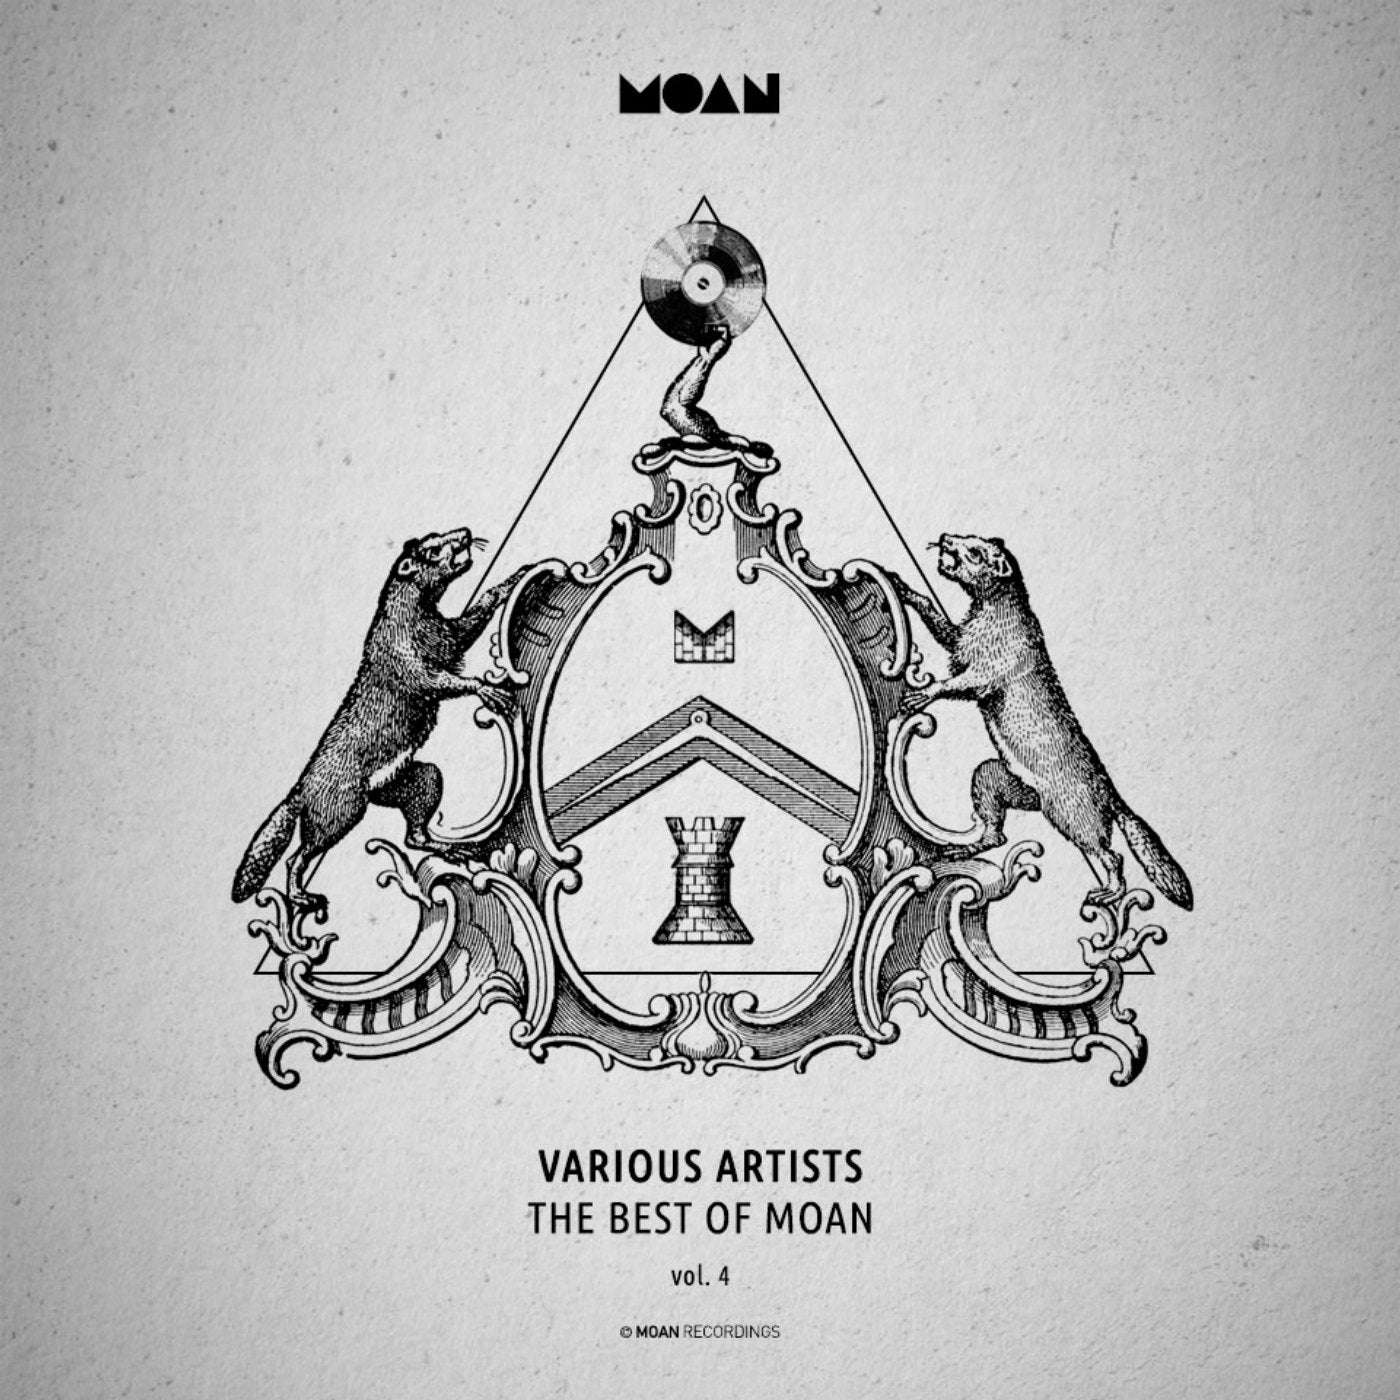 The Best Of Moan Vol.4